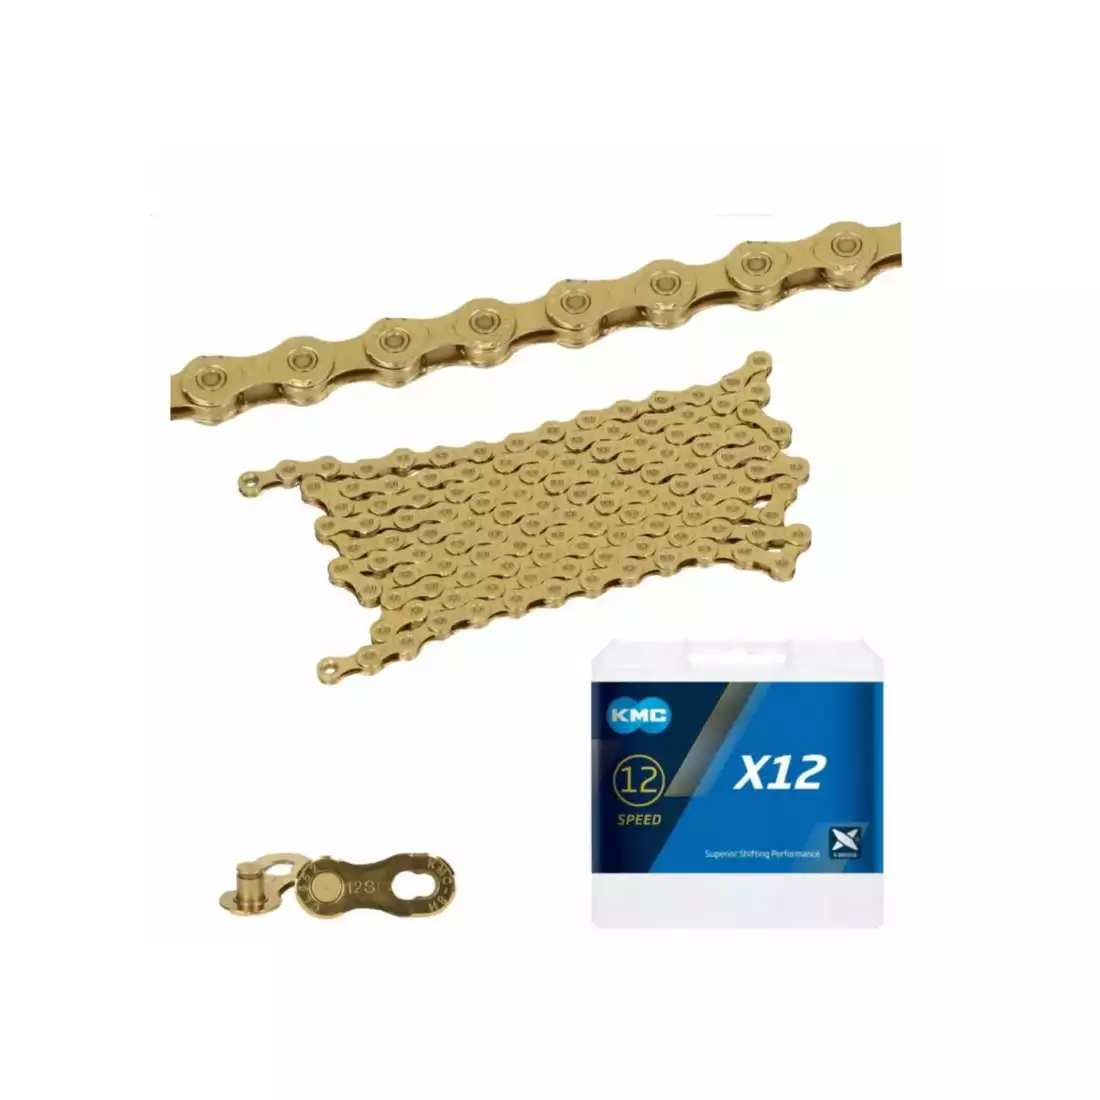 KMC X12 Bicycle chain, 12-speed, 126 links, Golden